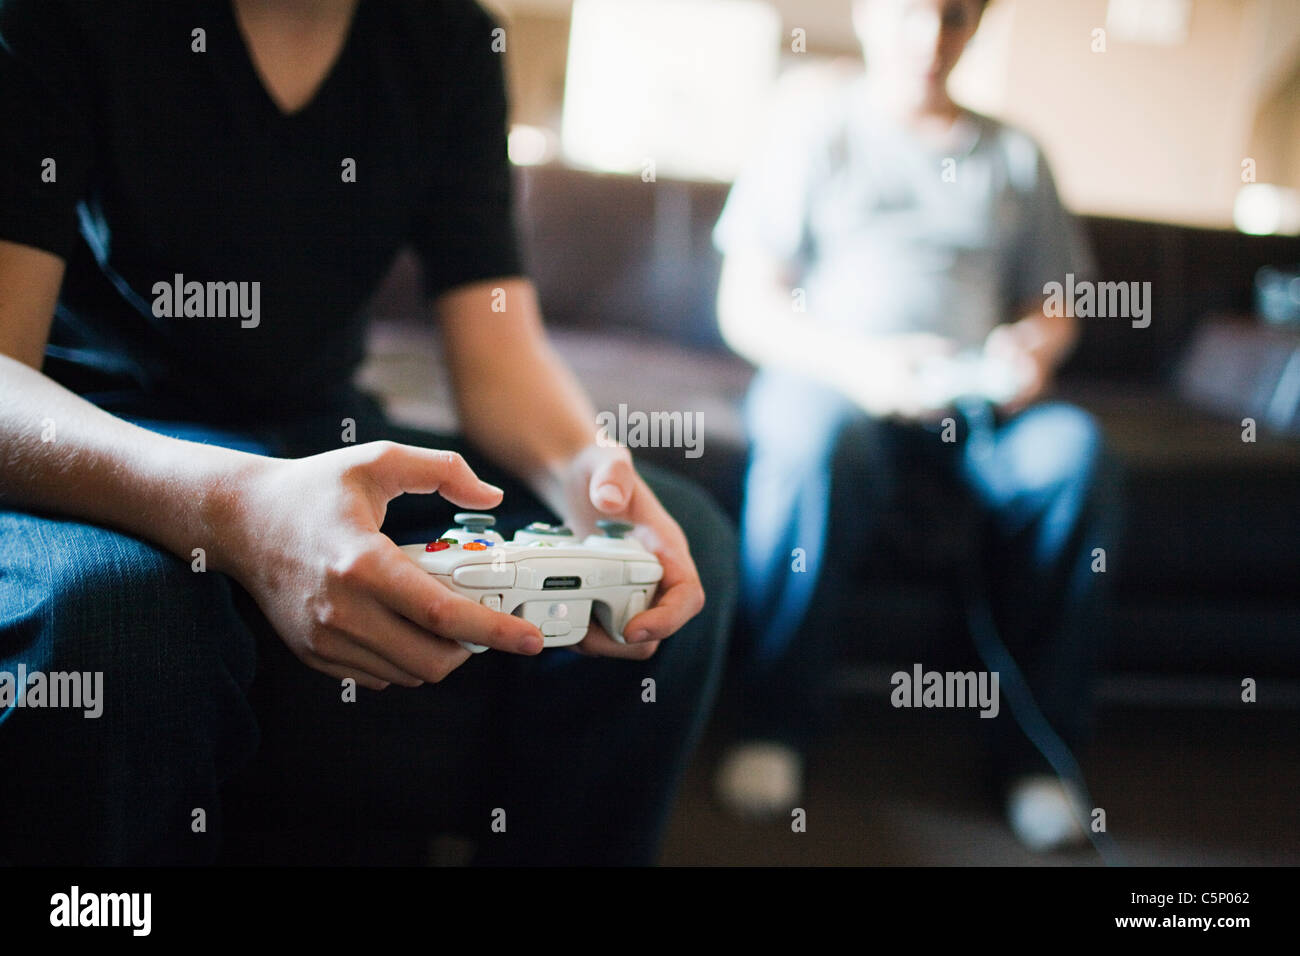 Two boys playing video games Stock Photo